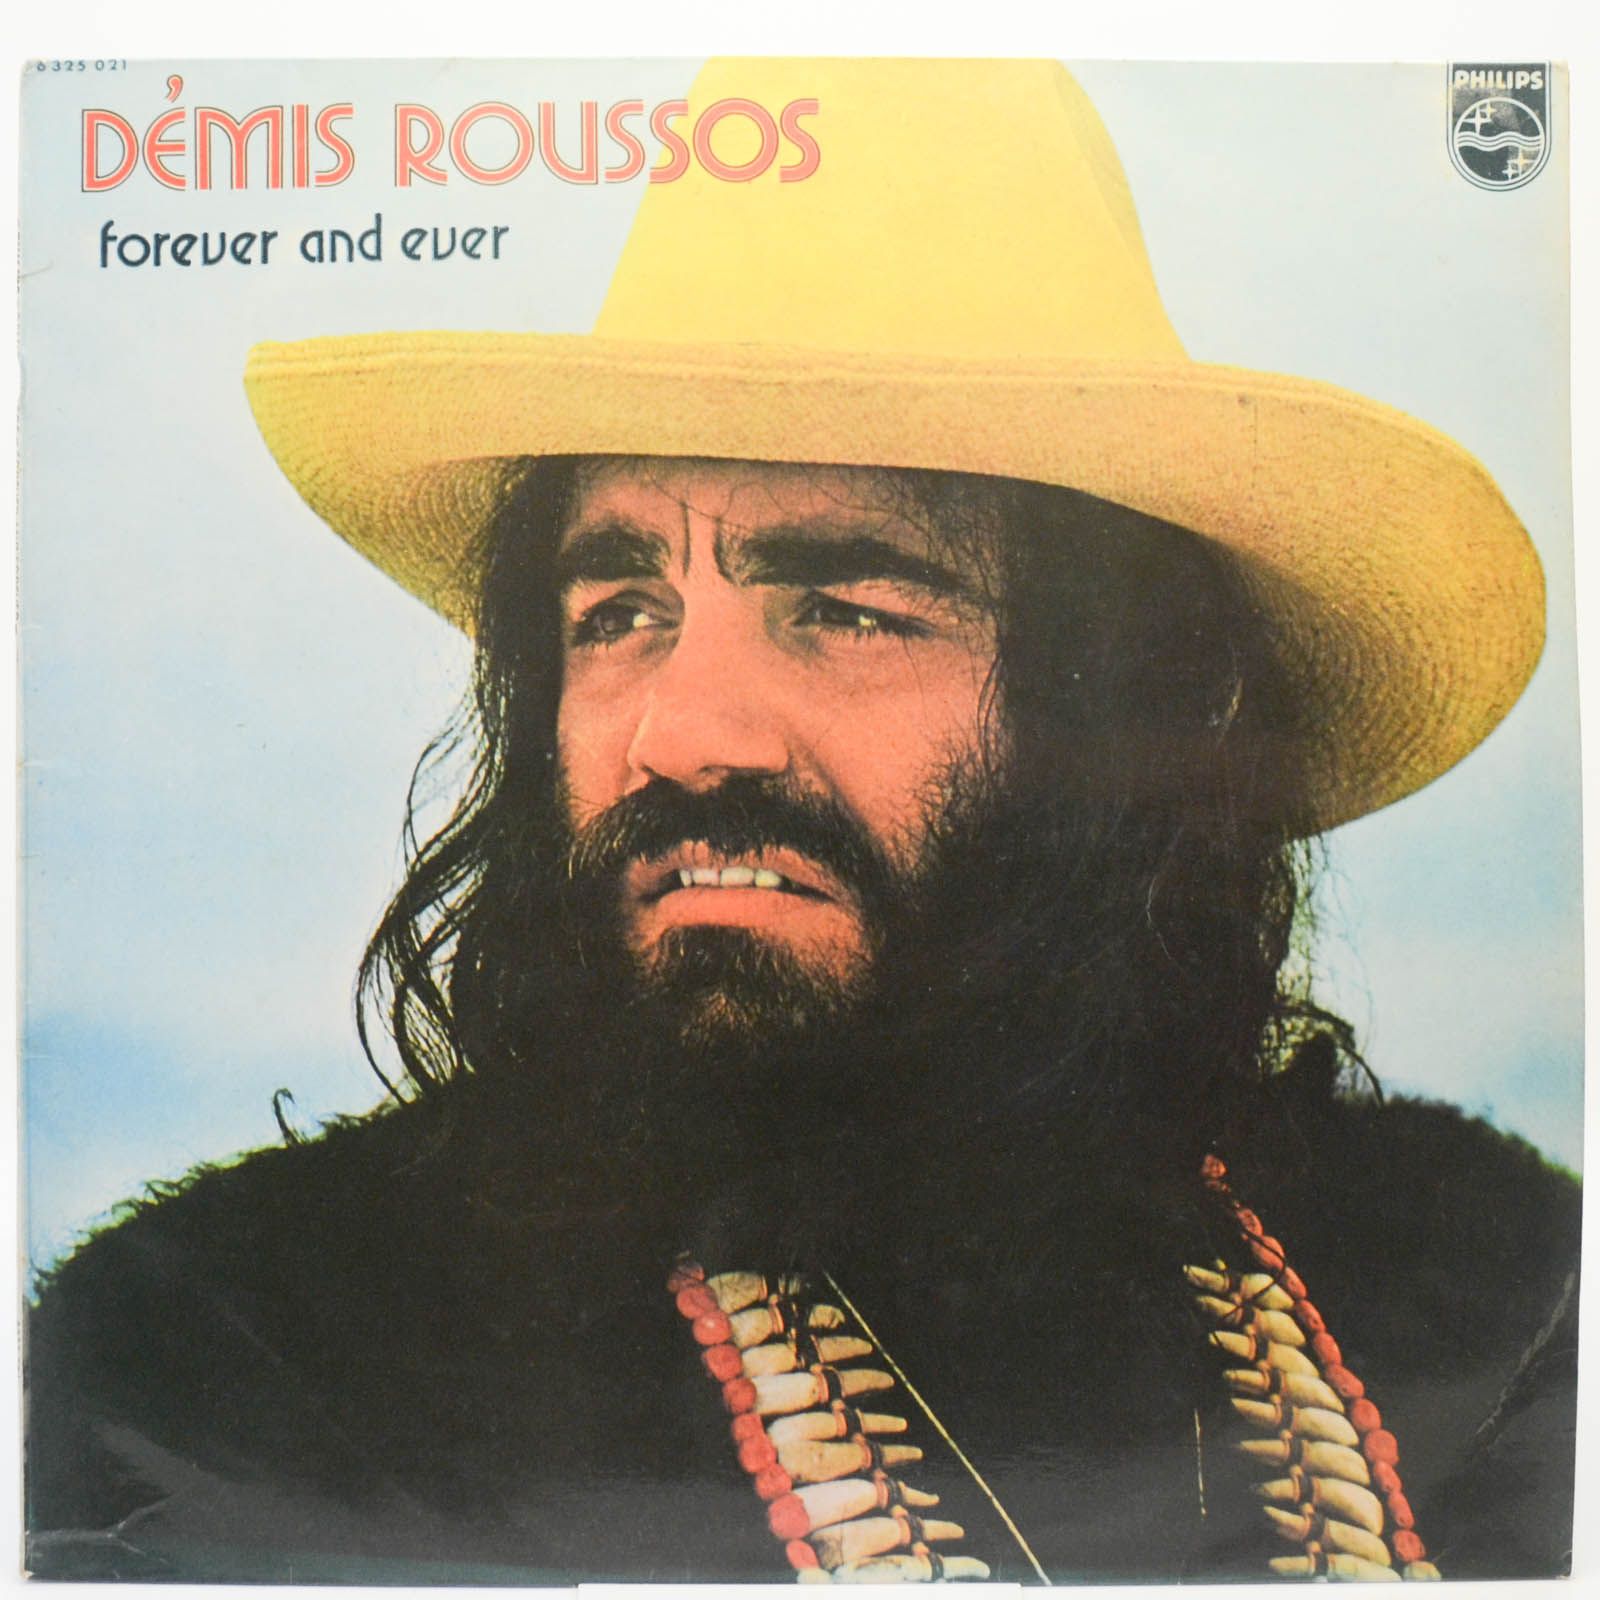 Démis Roussos — Forever And Ever (UK), 1973